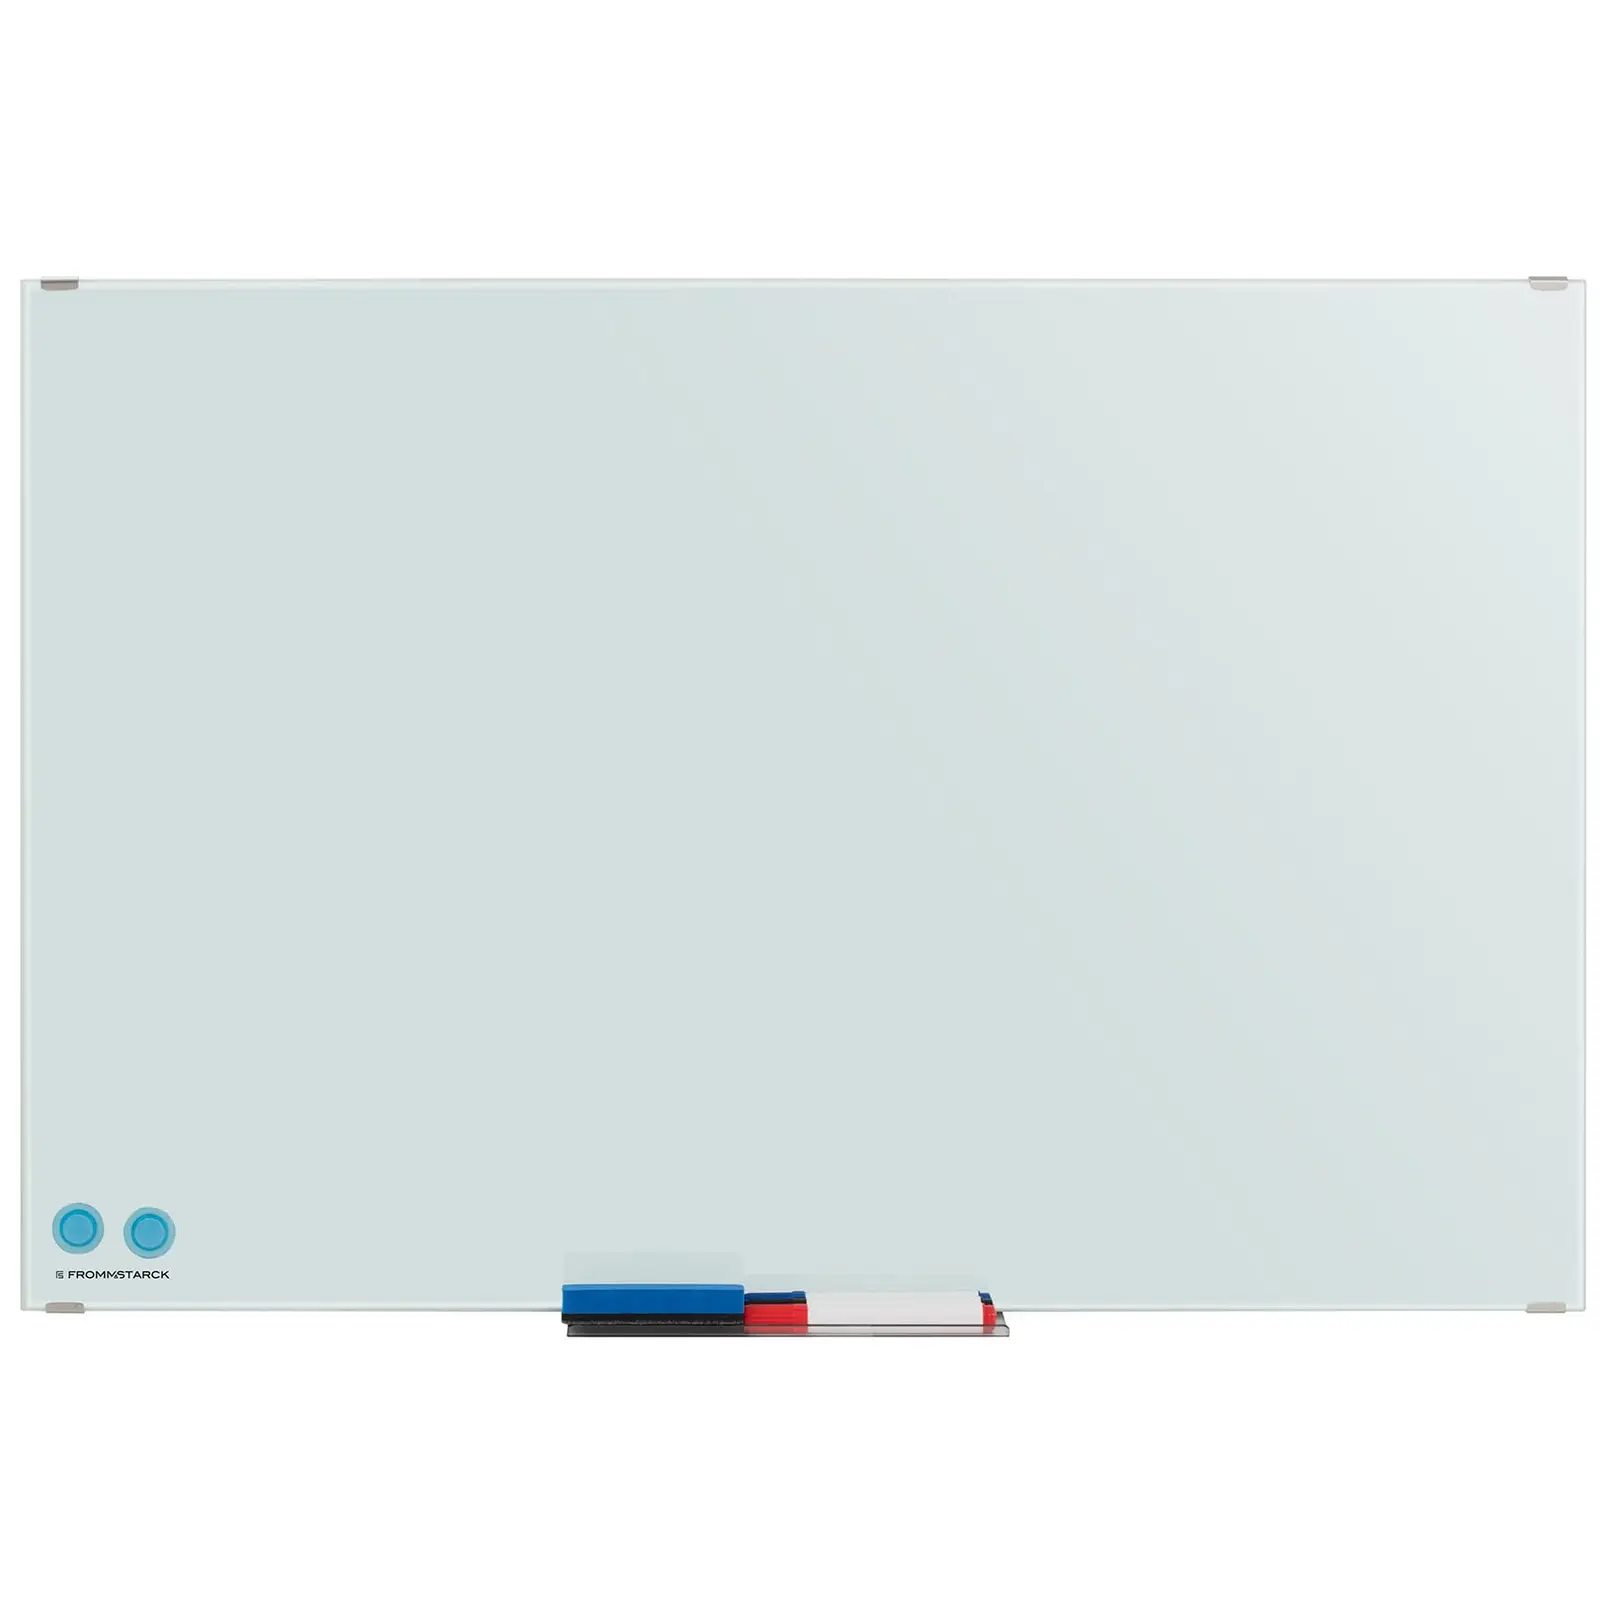 Factory second Whiteboard - 60 x 90 x 0.4 - magnetic